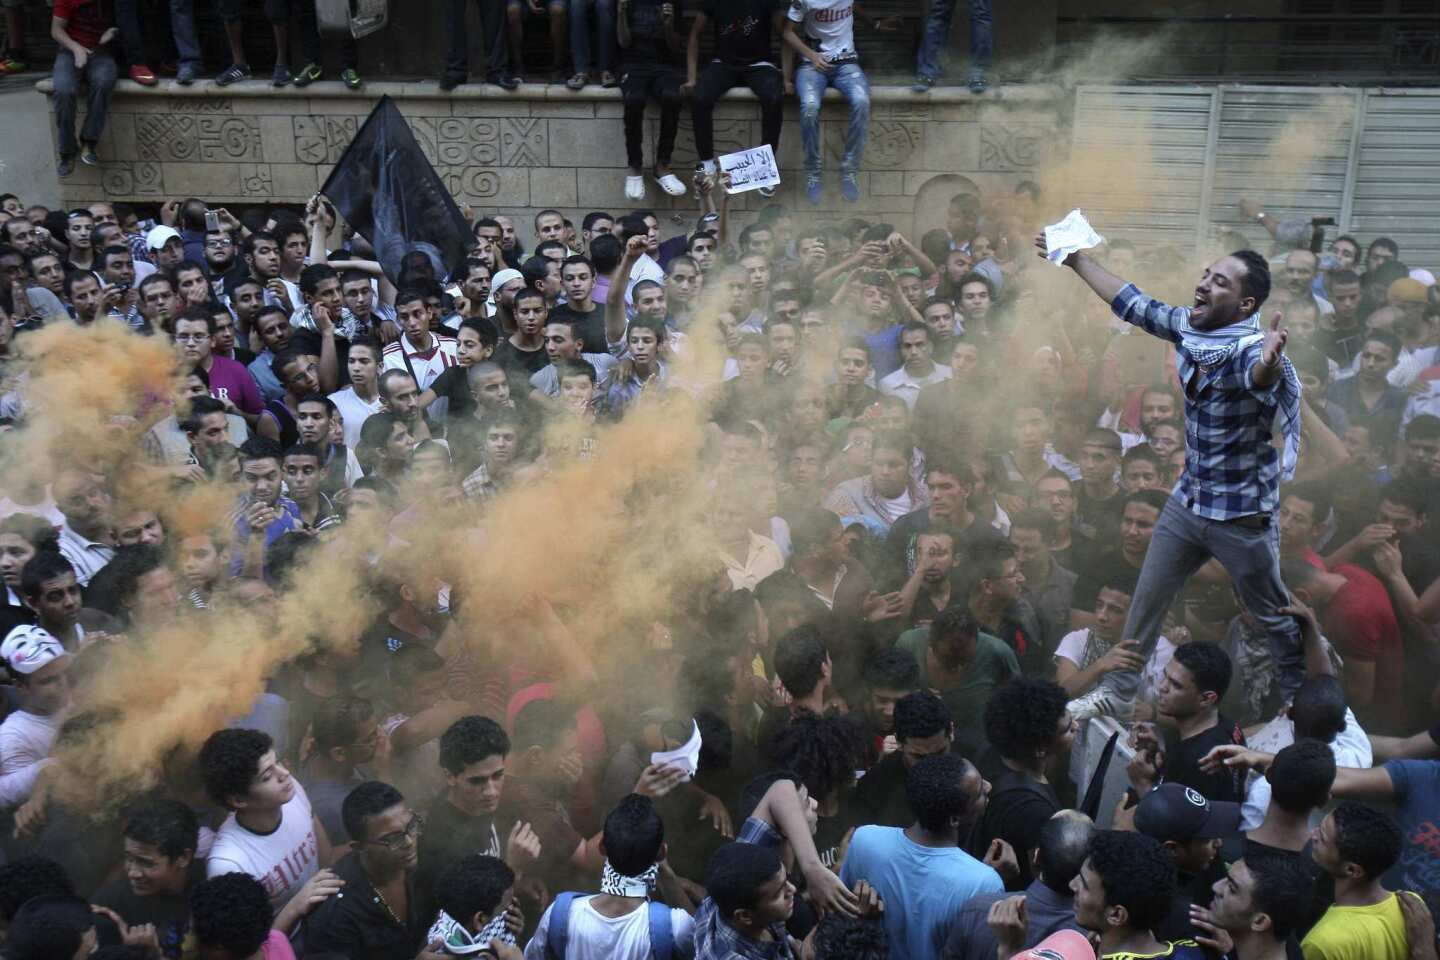 Protesters chant slogans as smoke rises outside the U.S. Embassy in Cairo. Demonstrators said Egyptian Coptic immigrants in the United States had made a video, posted on YouTube, that was anti-Muslim.